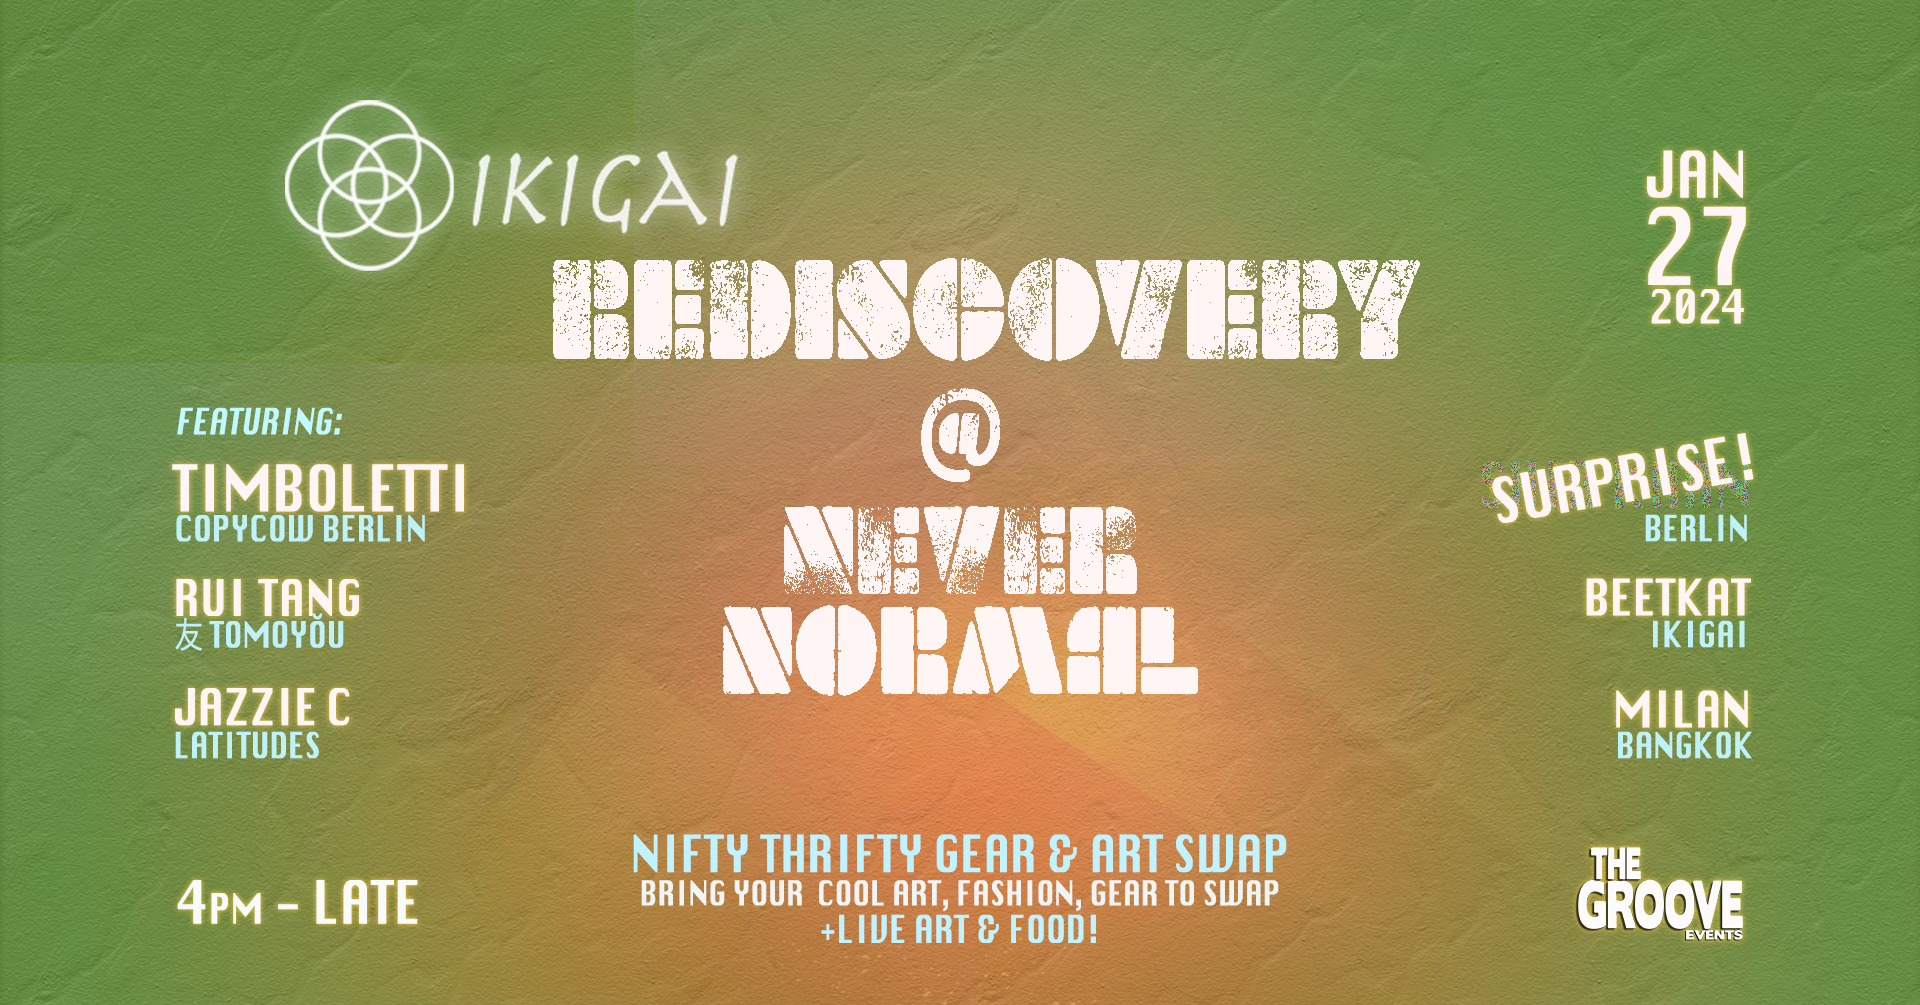 Ikigai: Rediscovery with BeetKat & Friends - feat. Timboletti, Rui Tang & Surprise guest - Página frontal